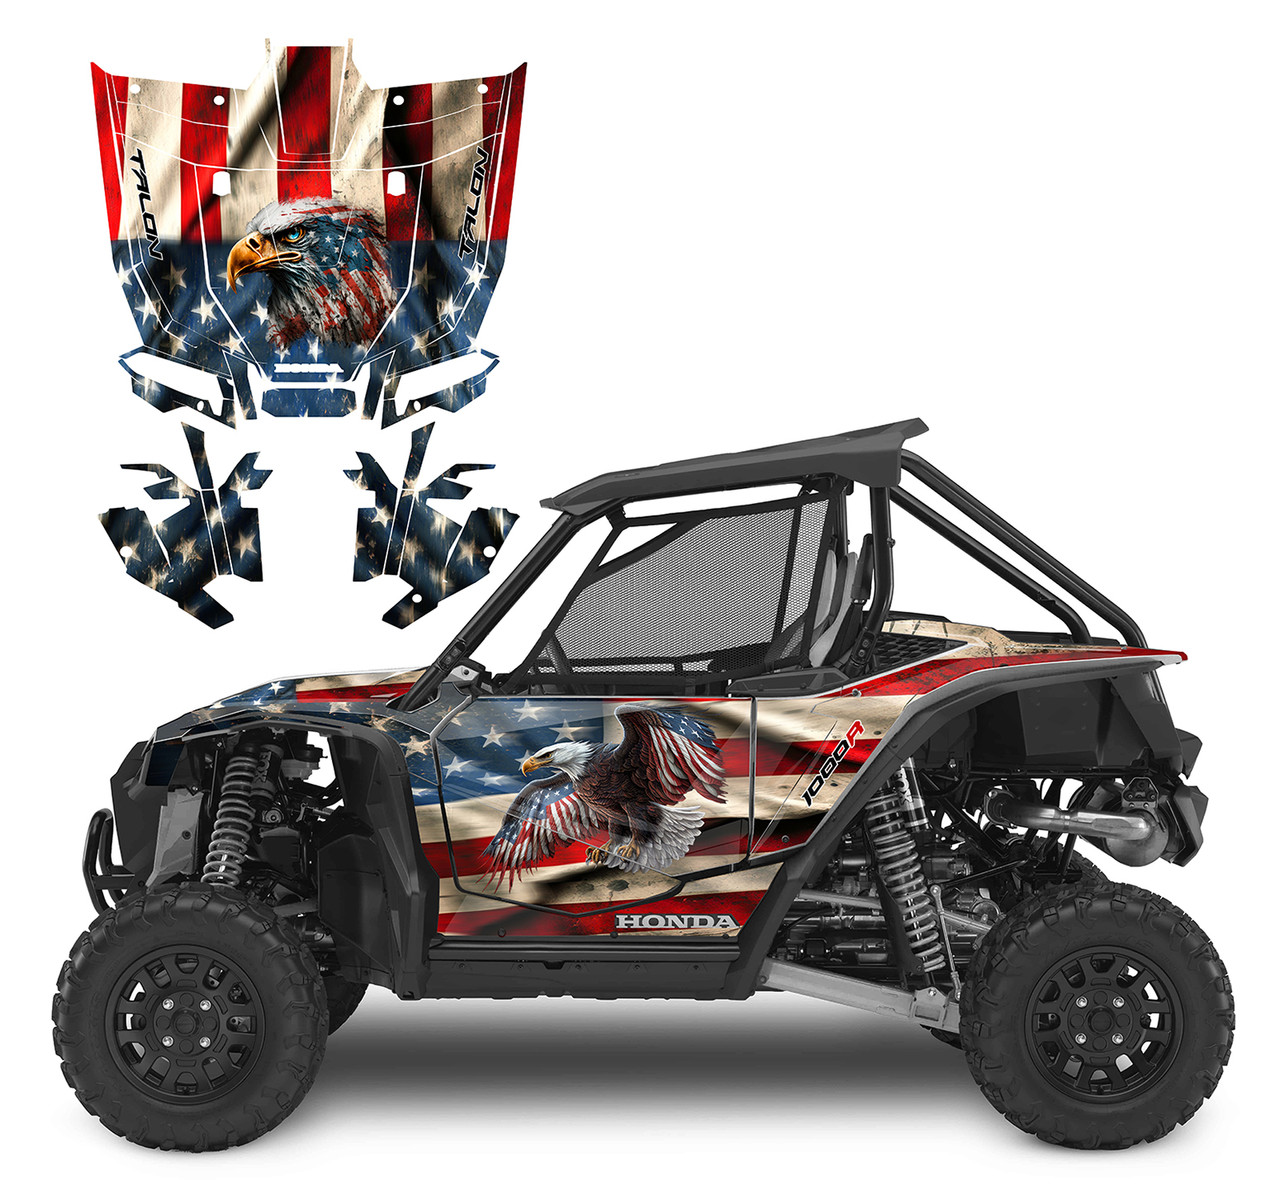 Talon 1000R X graphic wrap kit with American flag Soaring Eagle